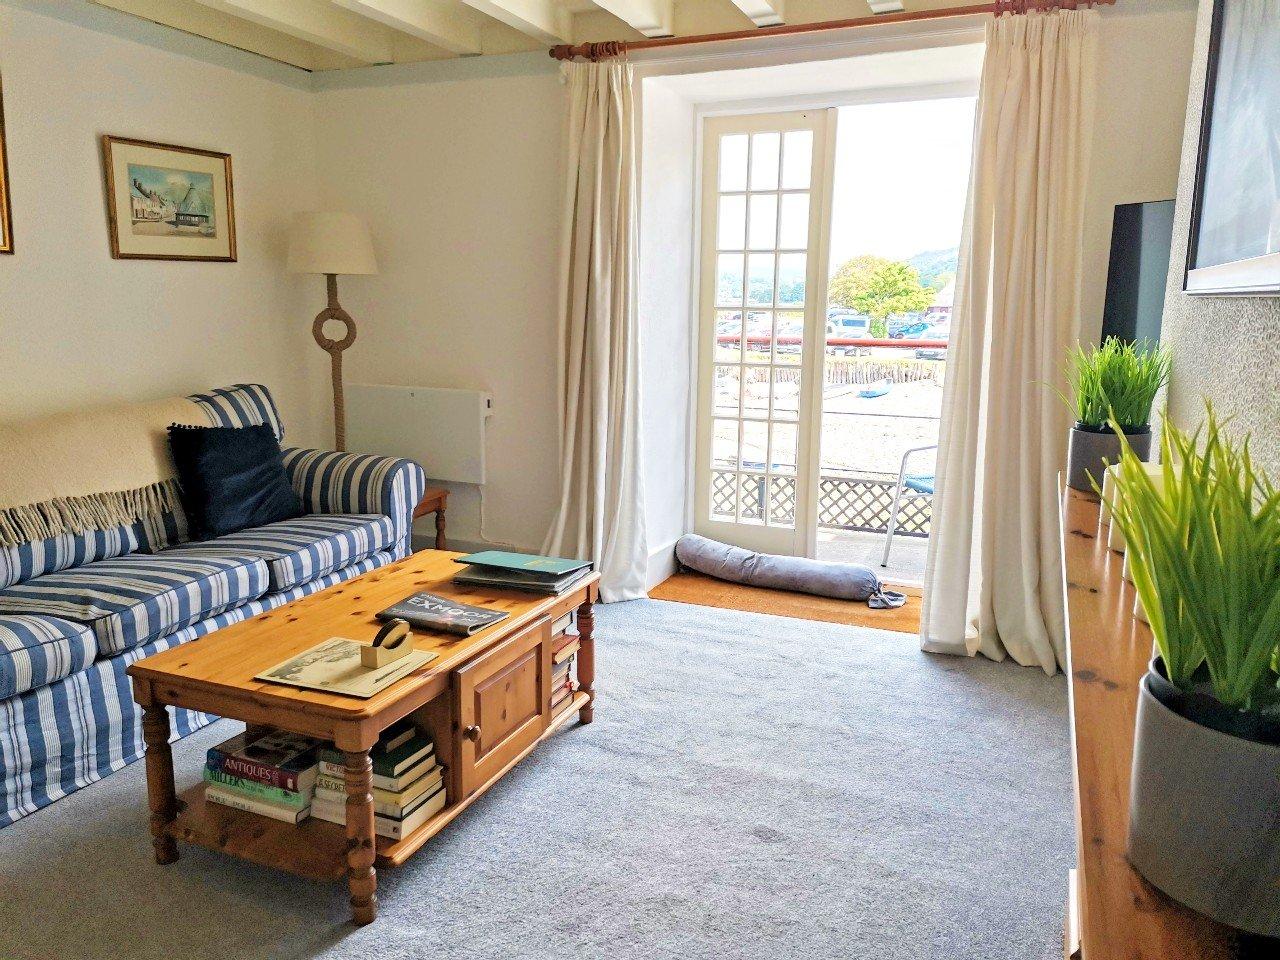 Harbour House Apartment Porlock Weir sitting room with french doors onto balcony overlooking the habour!